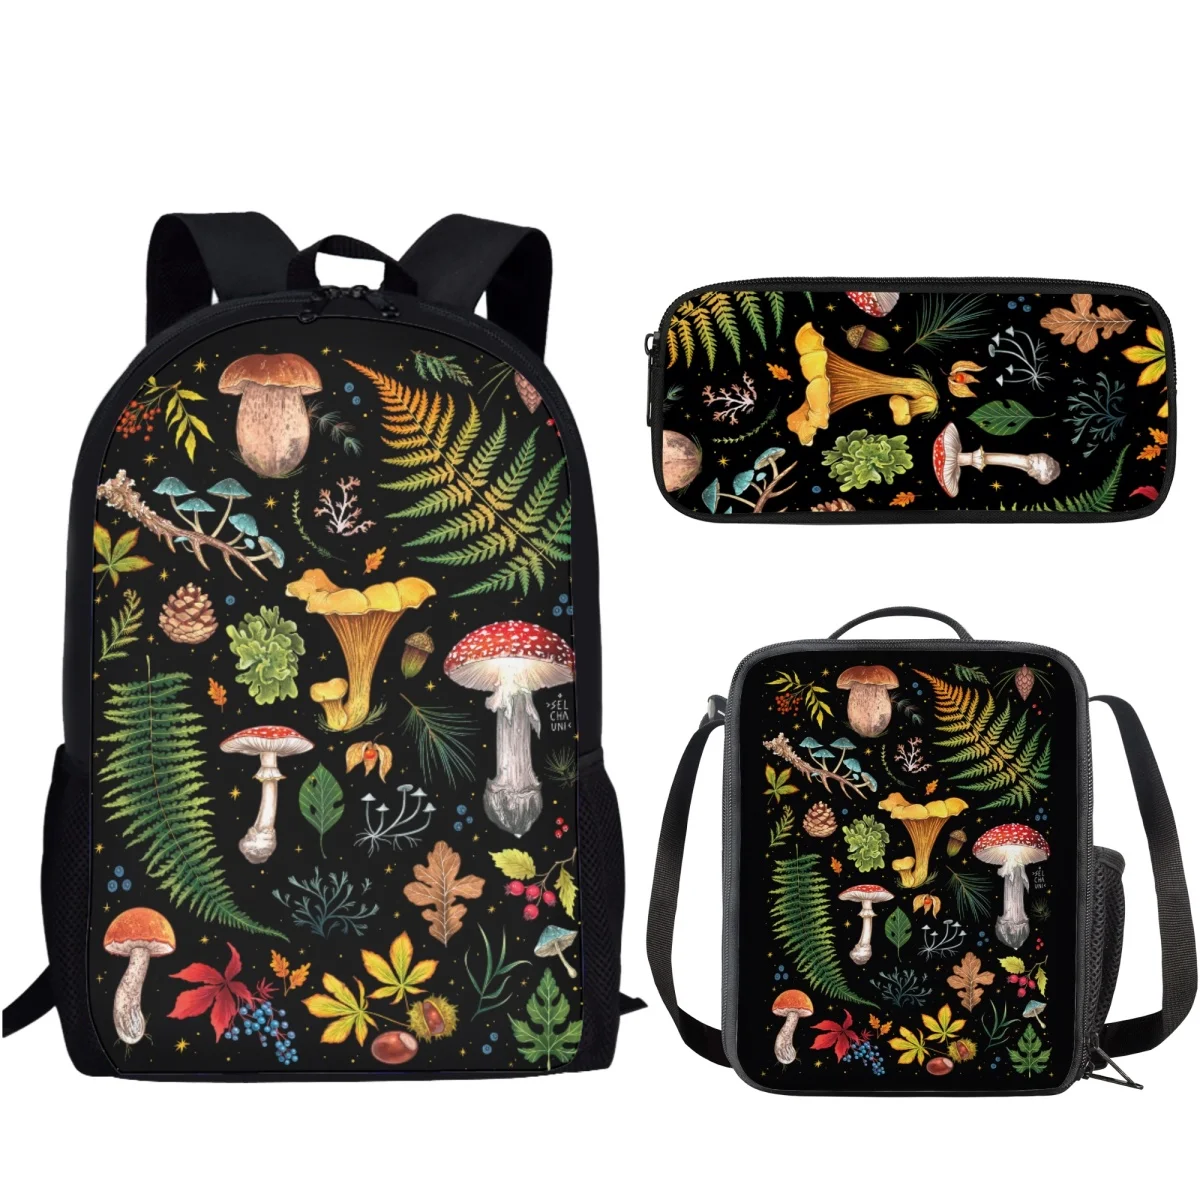 Mushroom 3D Print Fashion Schoolbag with Pencil Case 3 Pieces Set for Teens Kids Boys Casual Backpack Women Lunch Box Mochilas